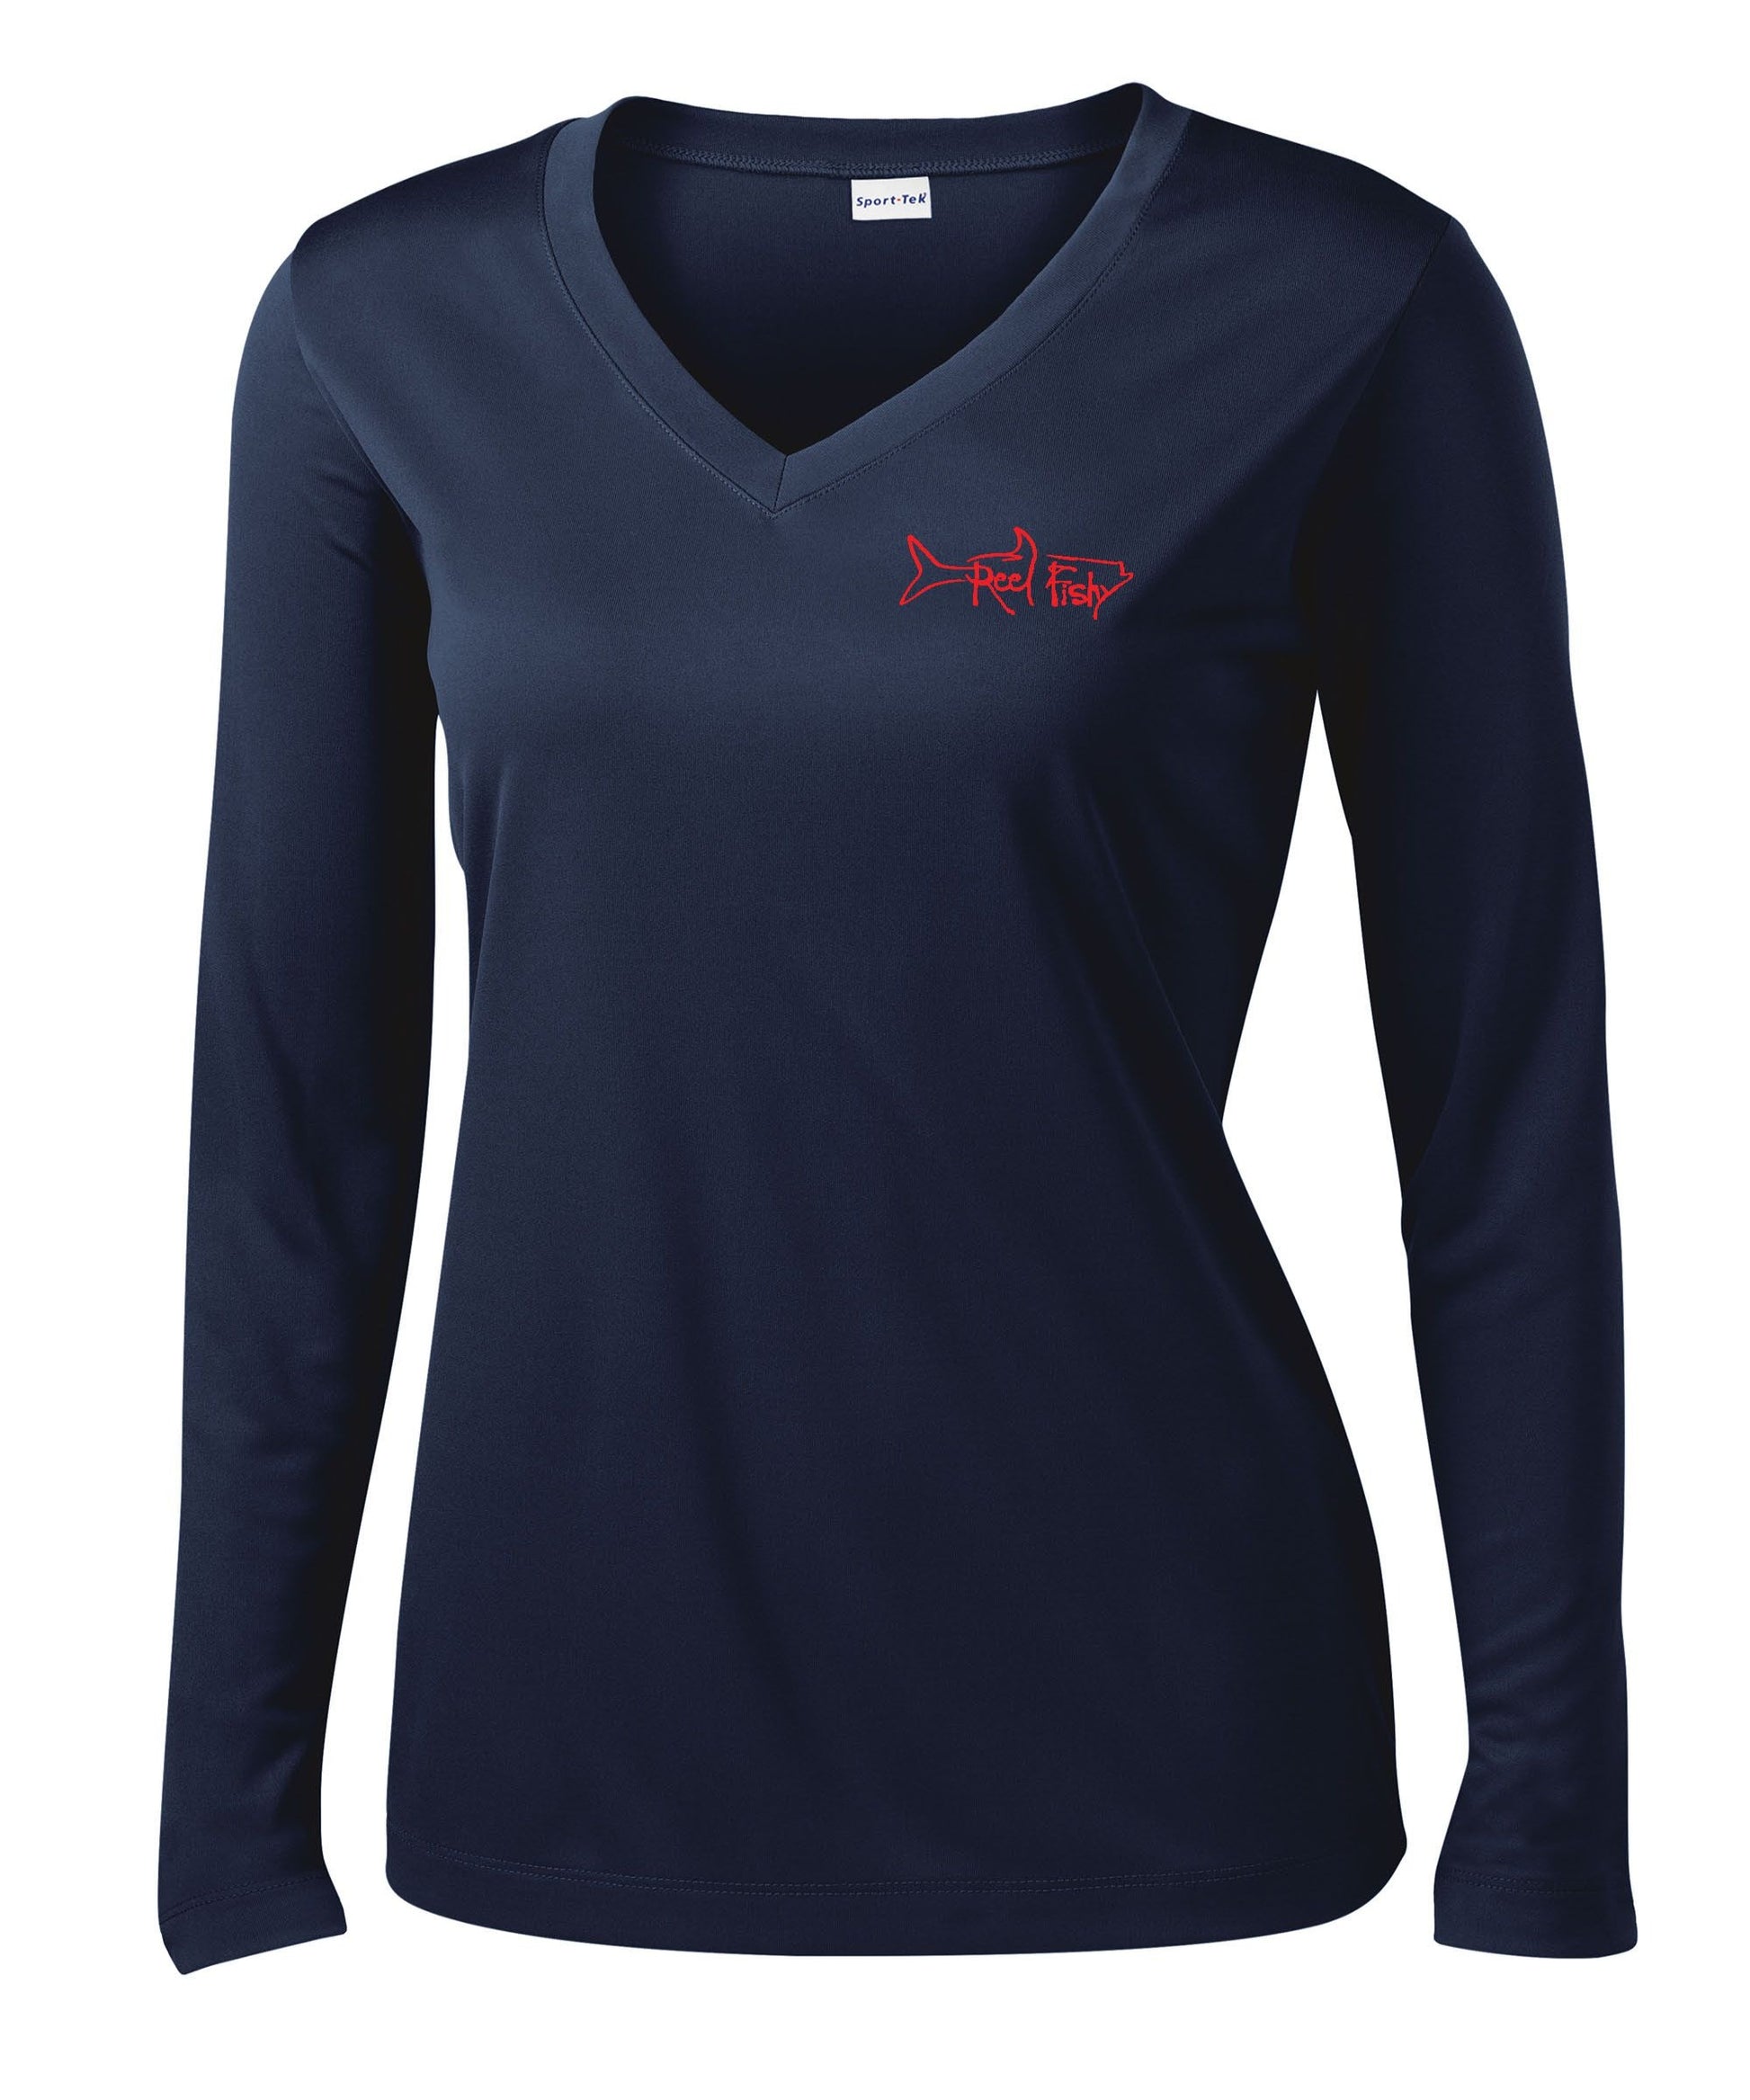 Ladies Lobster Performance Dry-Fit V-neck Fishing shirts with Sun Protection - "Bug Tickler" Dive Logo - Navy Long Sleeve (front Reel Fishy Tarpon logo)